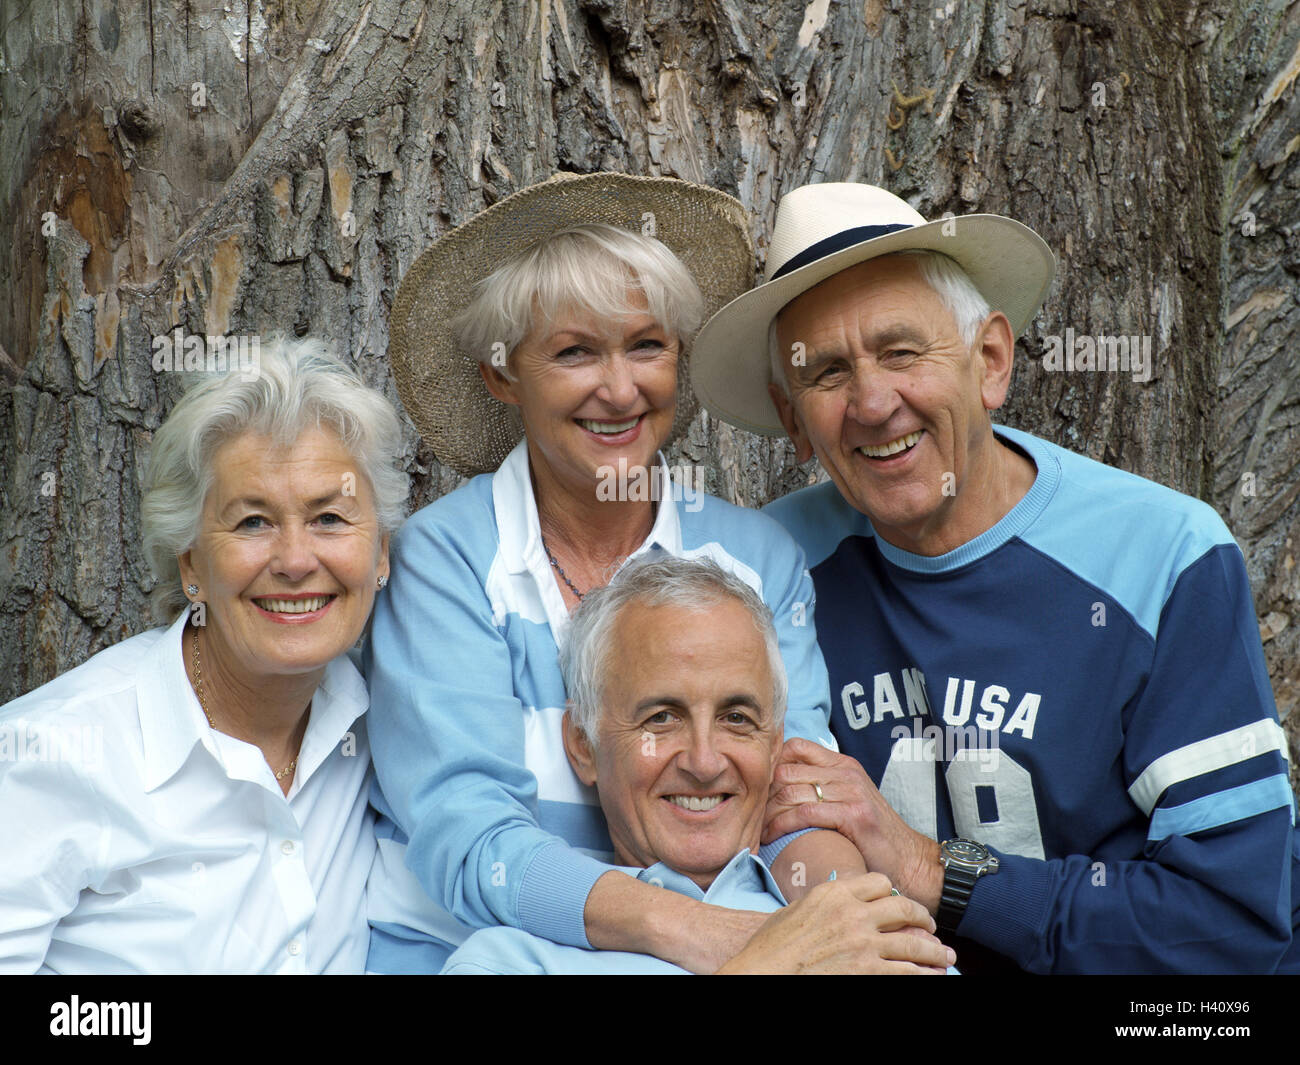 Tree, senior citizen's couples, happily, portrait, group picture, summer, garden, park, excursion, vacation, summer vacation, retirement, pension, leisure time, détente, rest, Best of all Age, old person, senior citizens, group, friends, couples, happily, contently, actively, young remaining, fit, agile, cheerfully, lighthearted, melted, smile, lean zusammensitzen, together, side by side, aneinanderlehnen, embrace, partnership, friendship, affection, community, togetherness, common characteristic, trust, suture, comlex, cohesion, joy of life, tuning positively, luck, satisfaction, attitude to Stock Photo